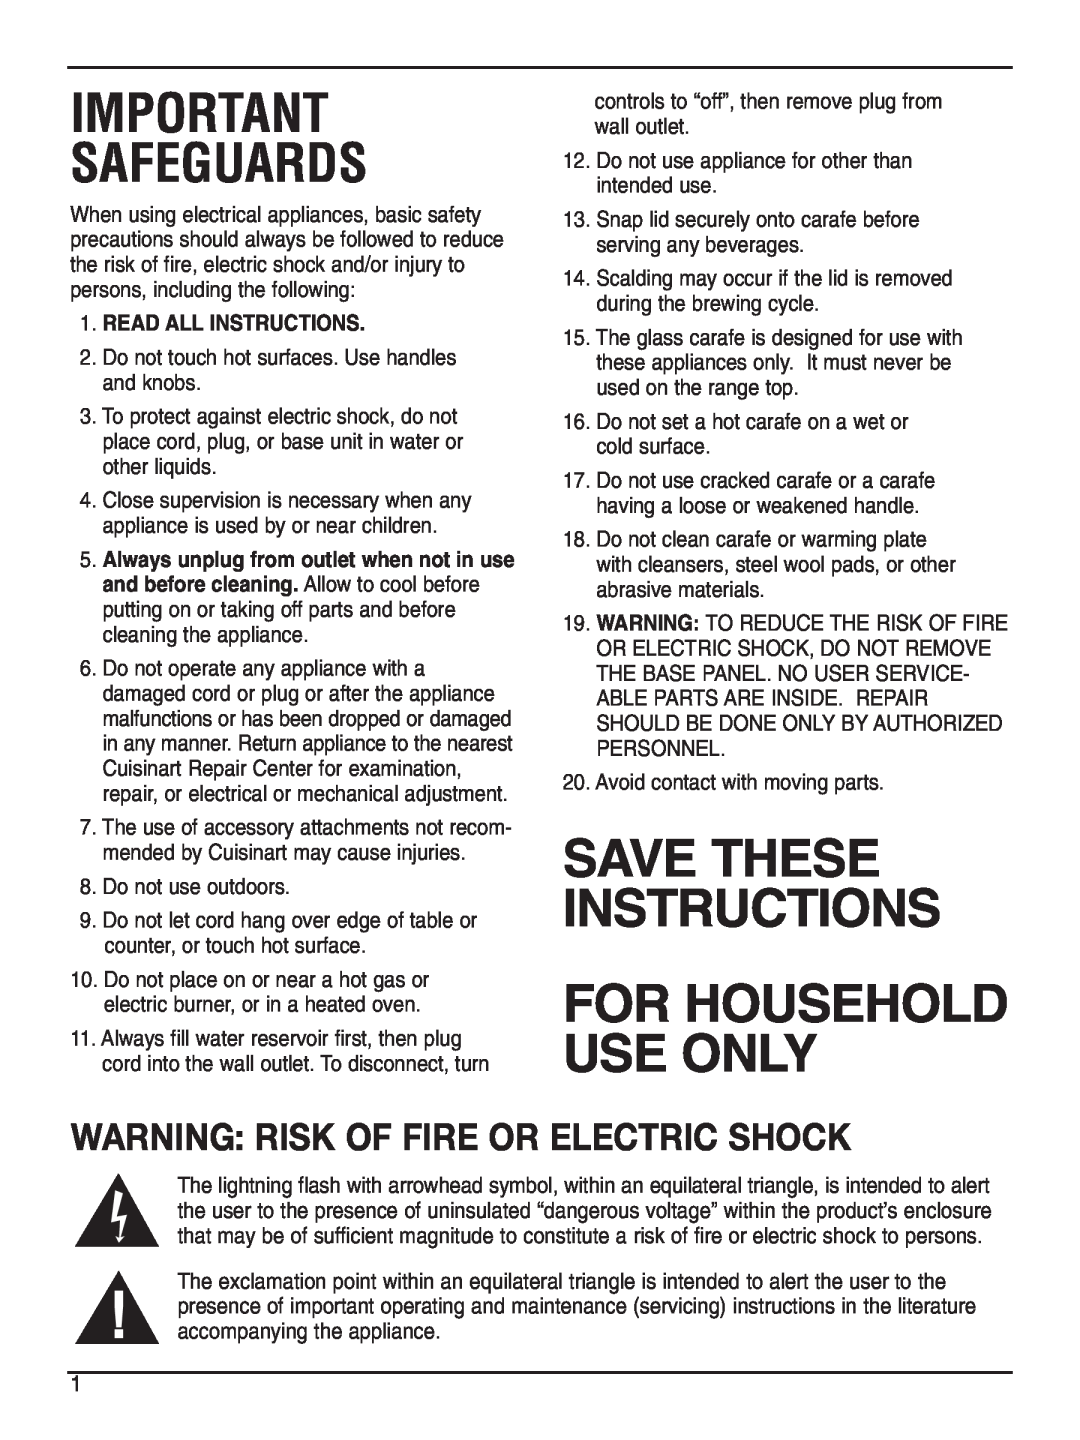 Cuisinart DCC-2200 Safeguards, For Household Use Only, Save These Instructions, Warning Risk Of Fire Or Electric Shock 